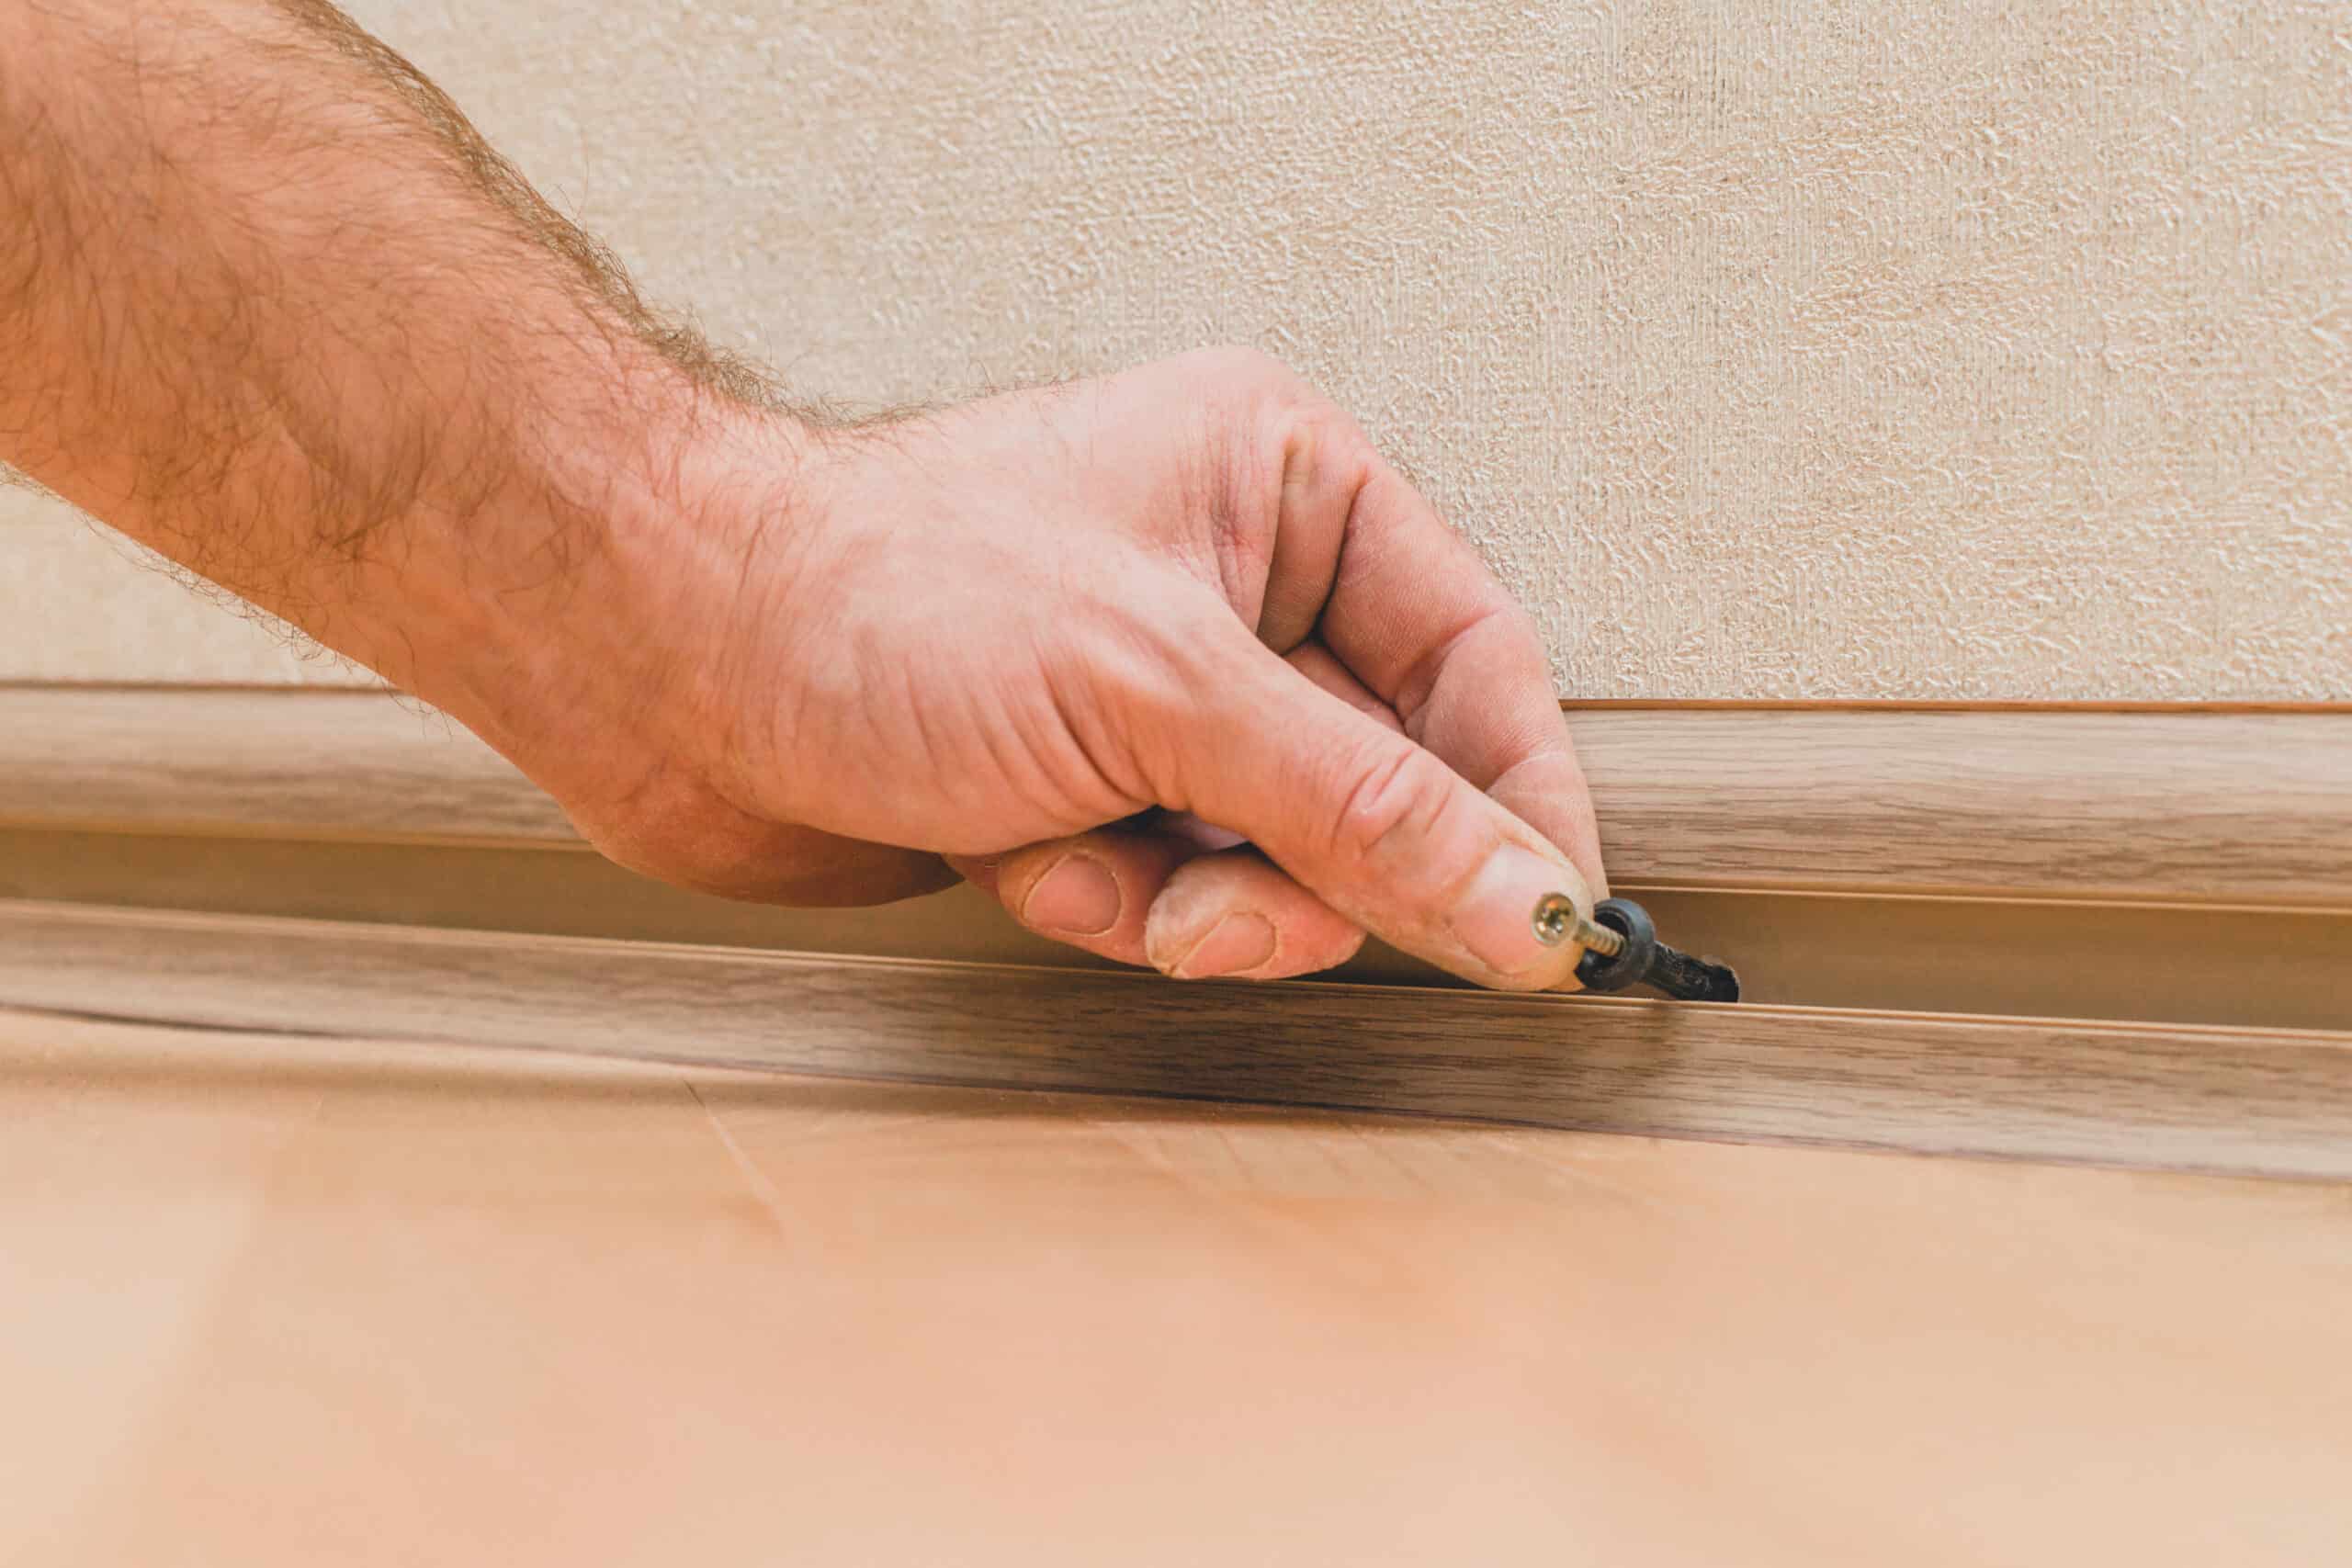 How To Join Baseboard